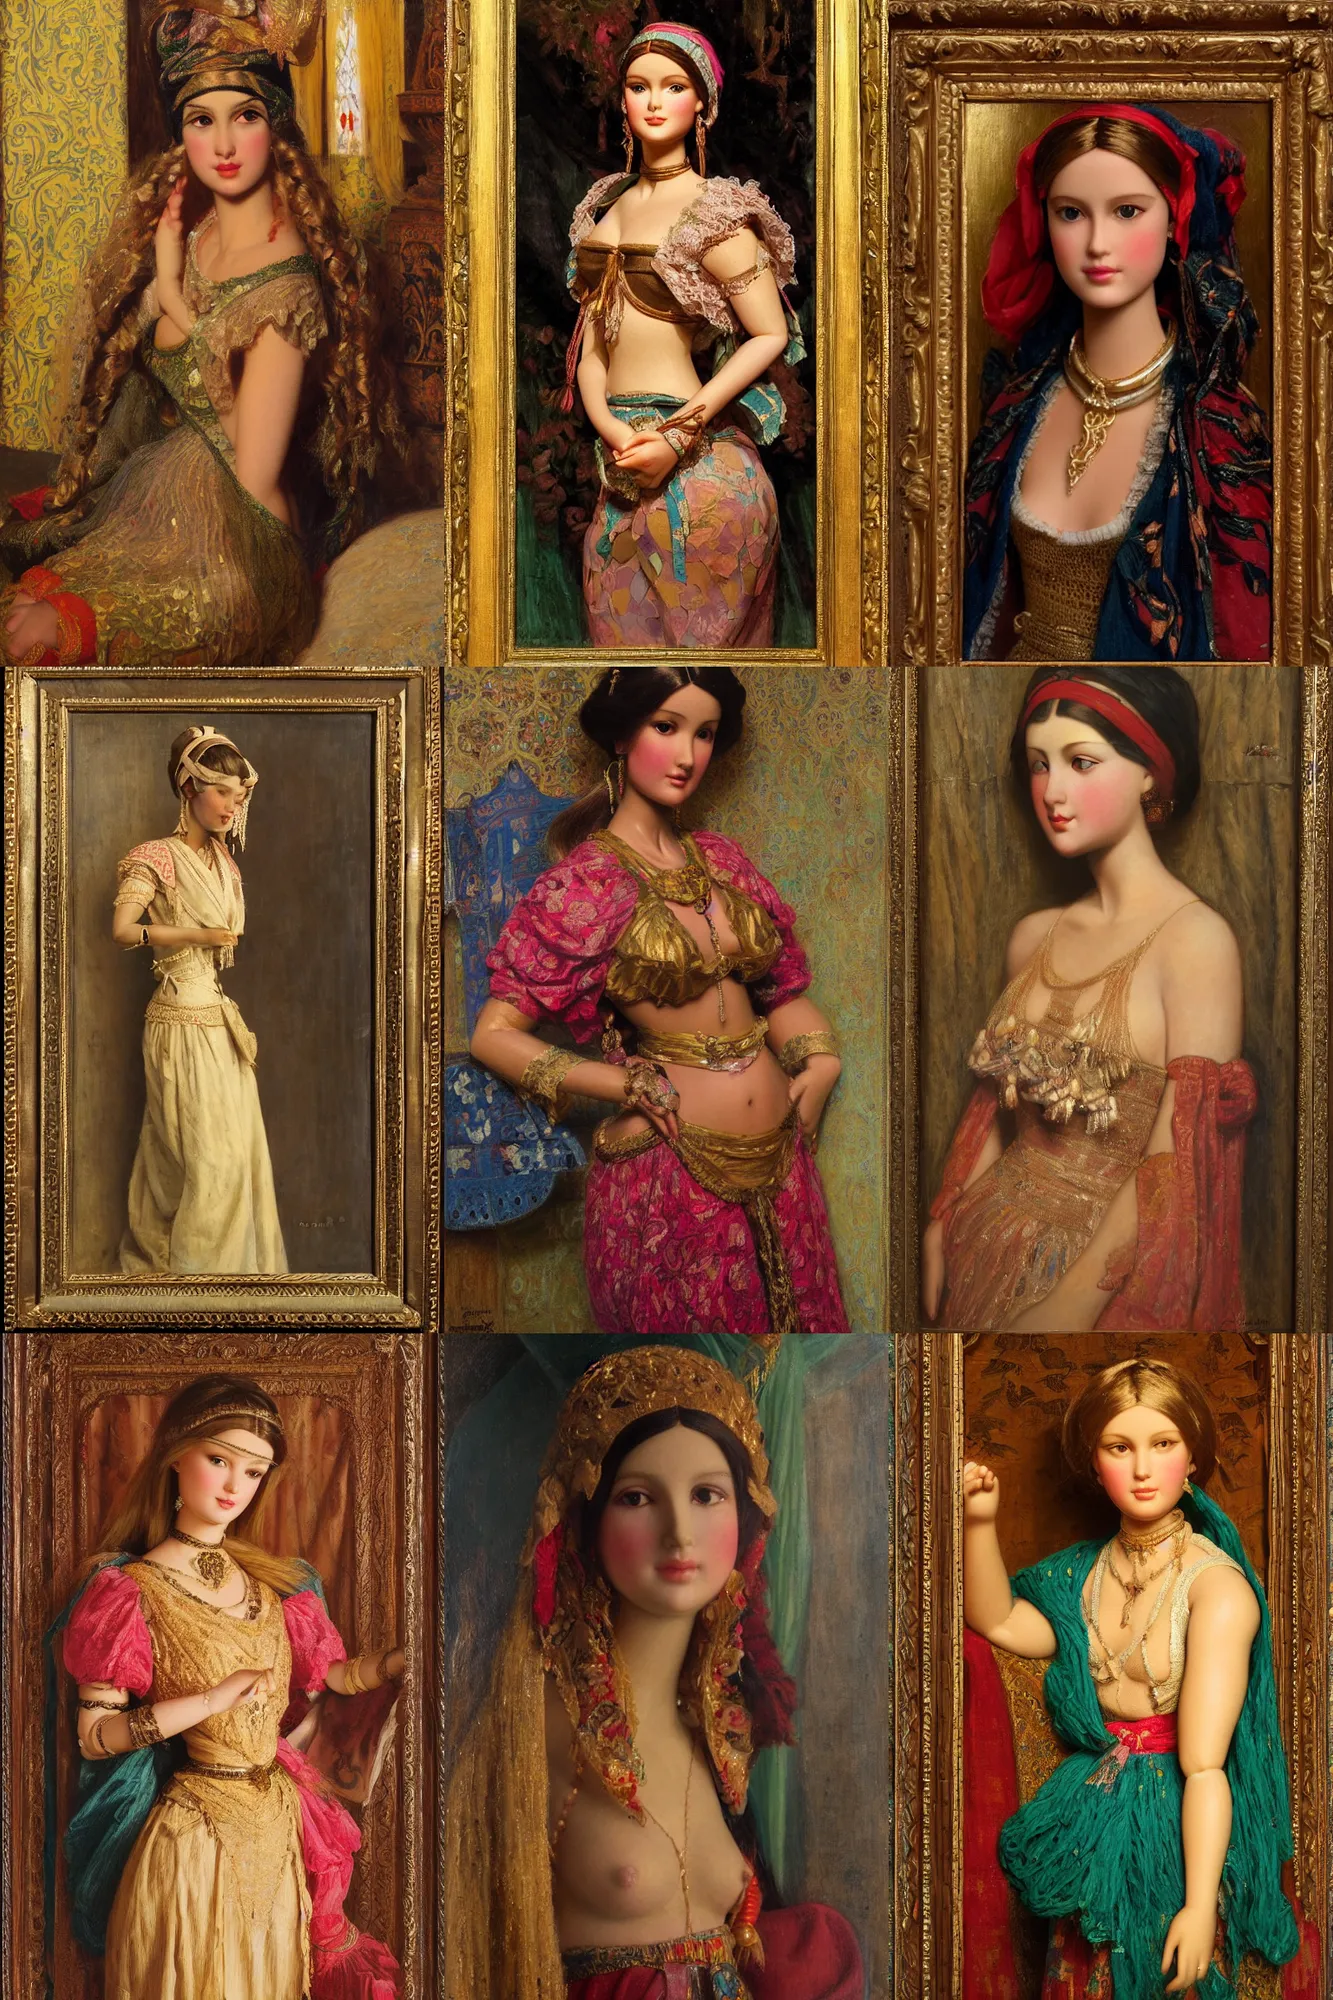 Prompt: orientalism image of a barbie doll by edwin longsden long and theodore ralli and nasreddine dinet and adam styka, masterful intricate art. oil on canvas, excellent lighting, high detail 8 k